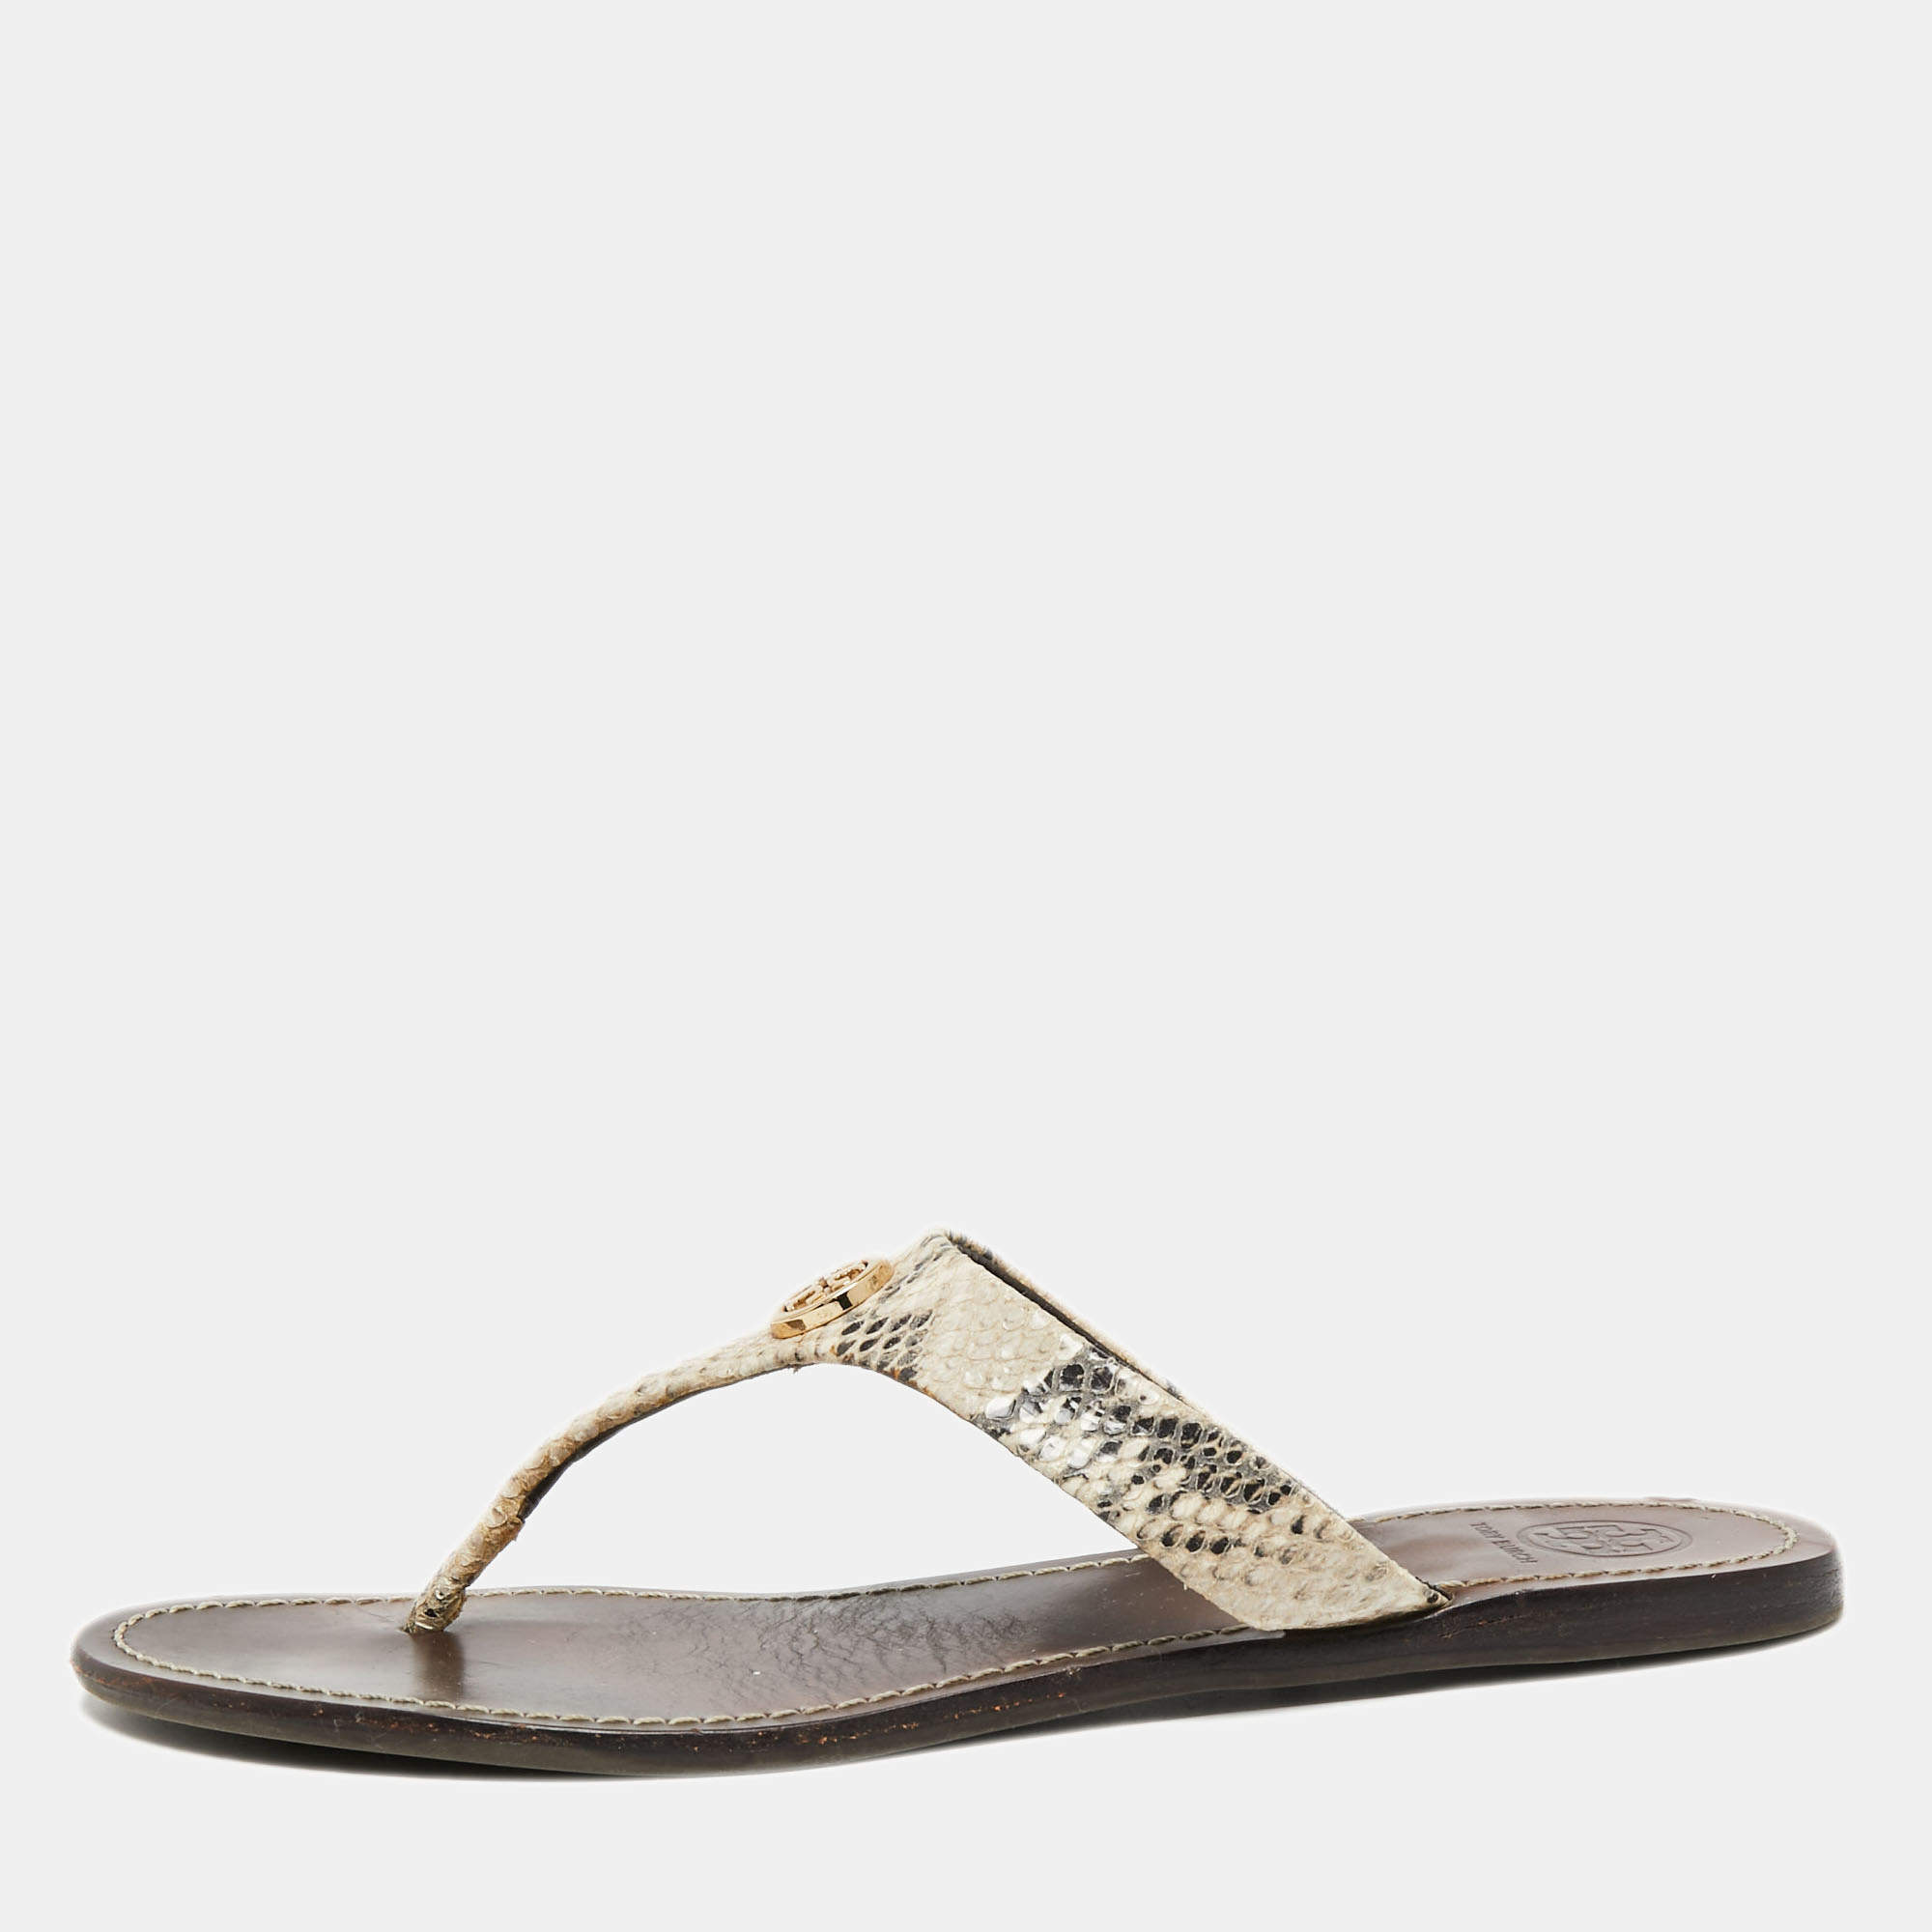 Tory Burch Beige/Black Snakeskin Embossed Leather Flat Thong Sandals Size   Tory Burch | TLC